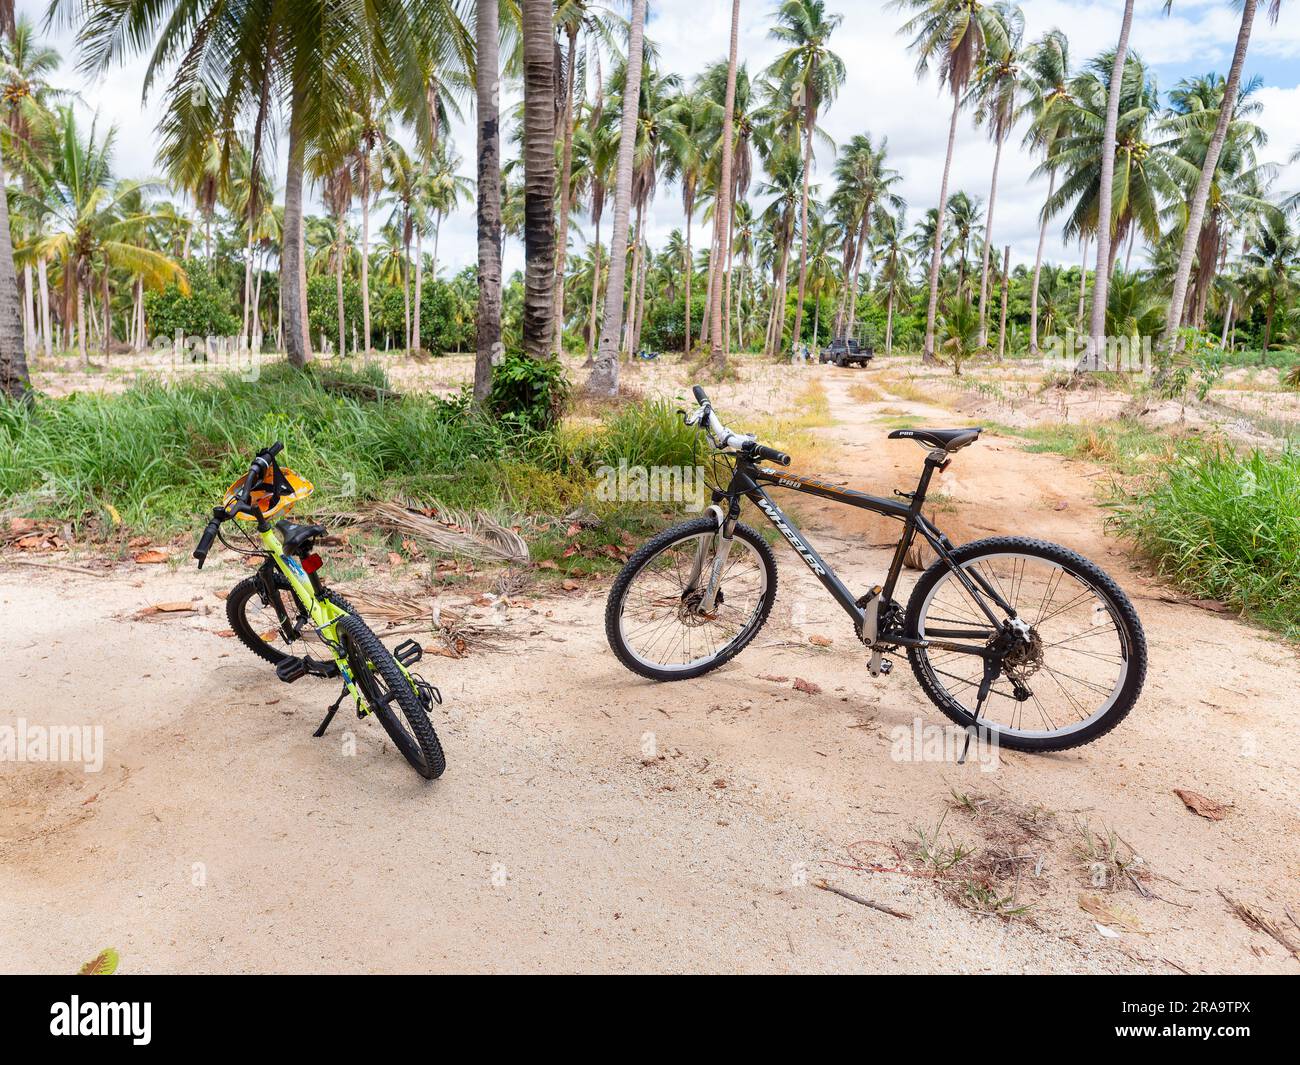 Two offroad bicycles on a dirt road through a coconut plantation in Chonburi Province, Thailand. Shallow depth of field with the bicycles in focus and Stock Photo